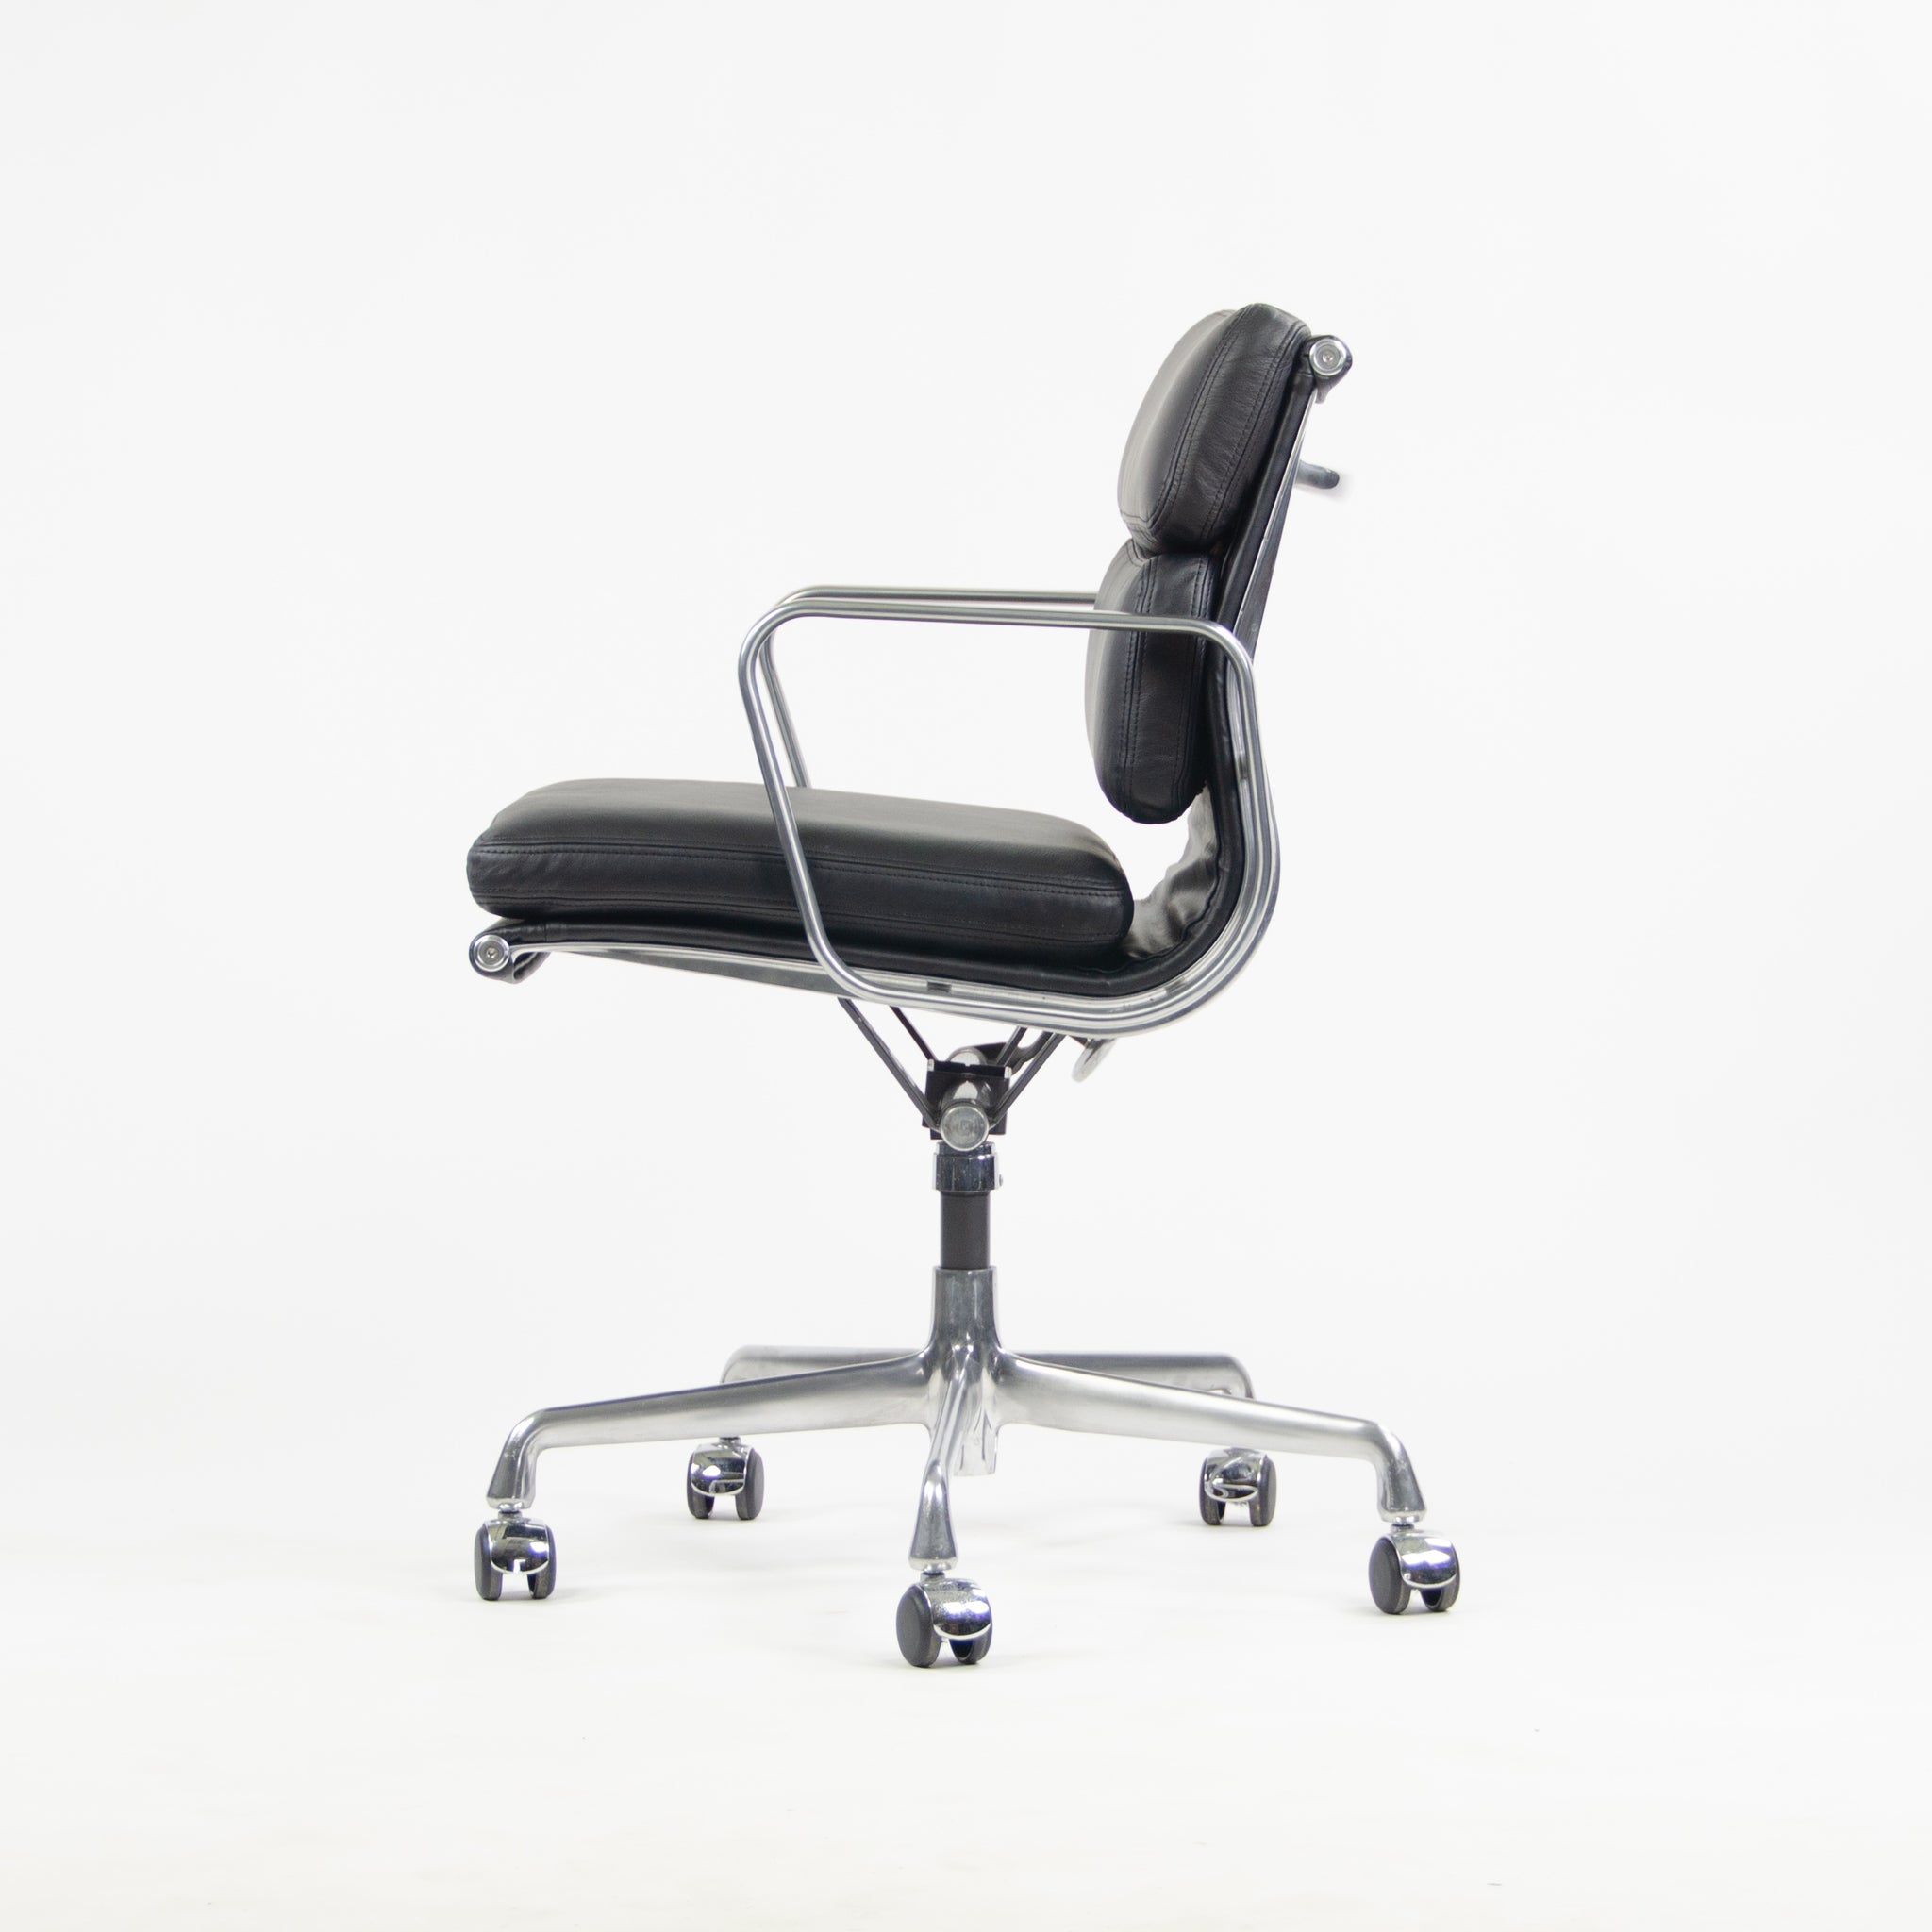 SOLD NEW Old Stock Eames Herman Miller Low Soft Pad Aluminum Desk Chair Black Leather